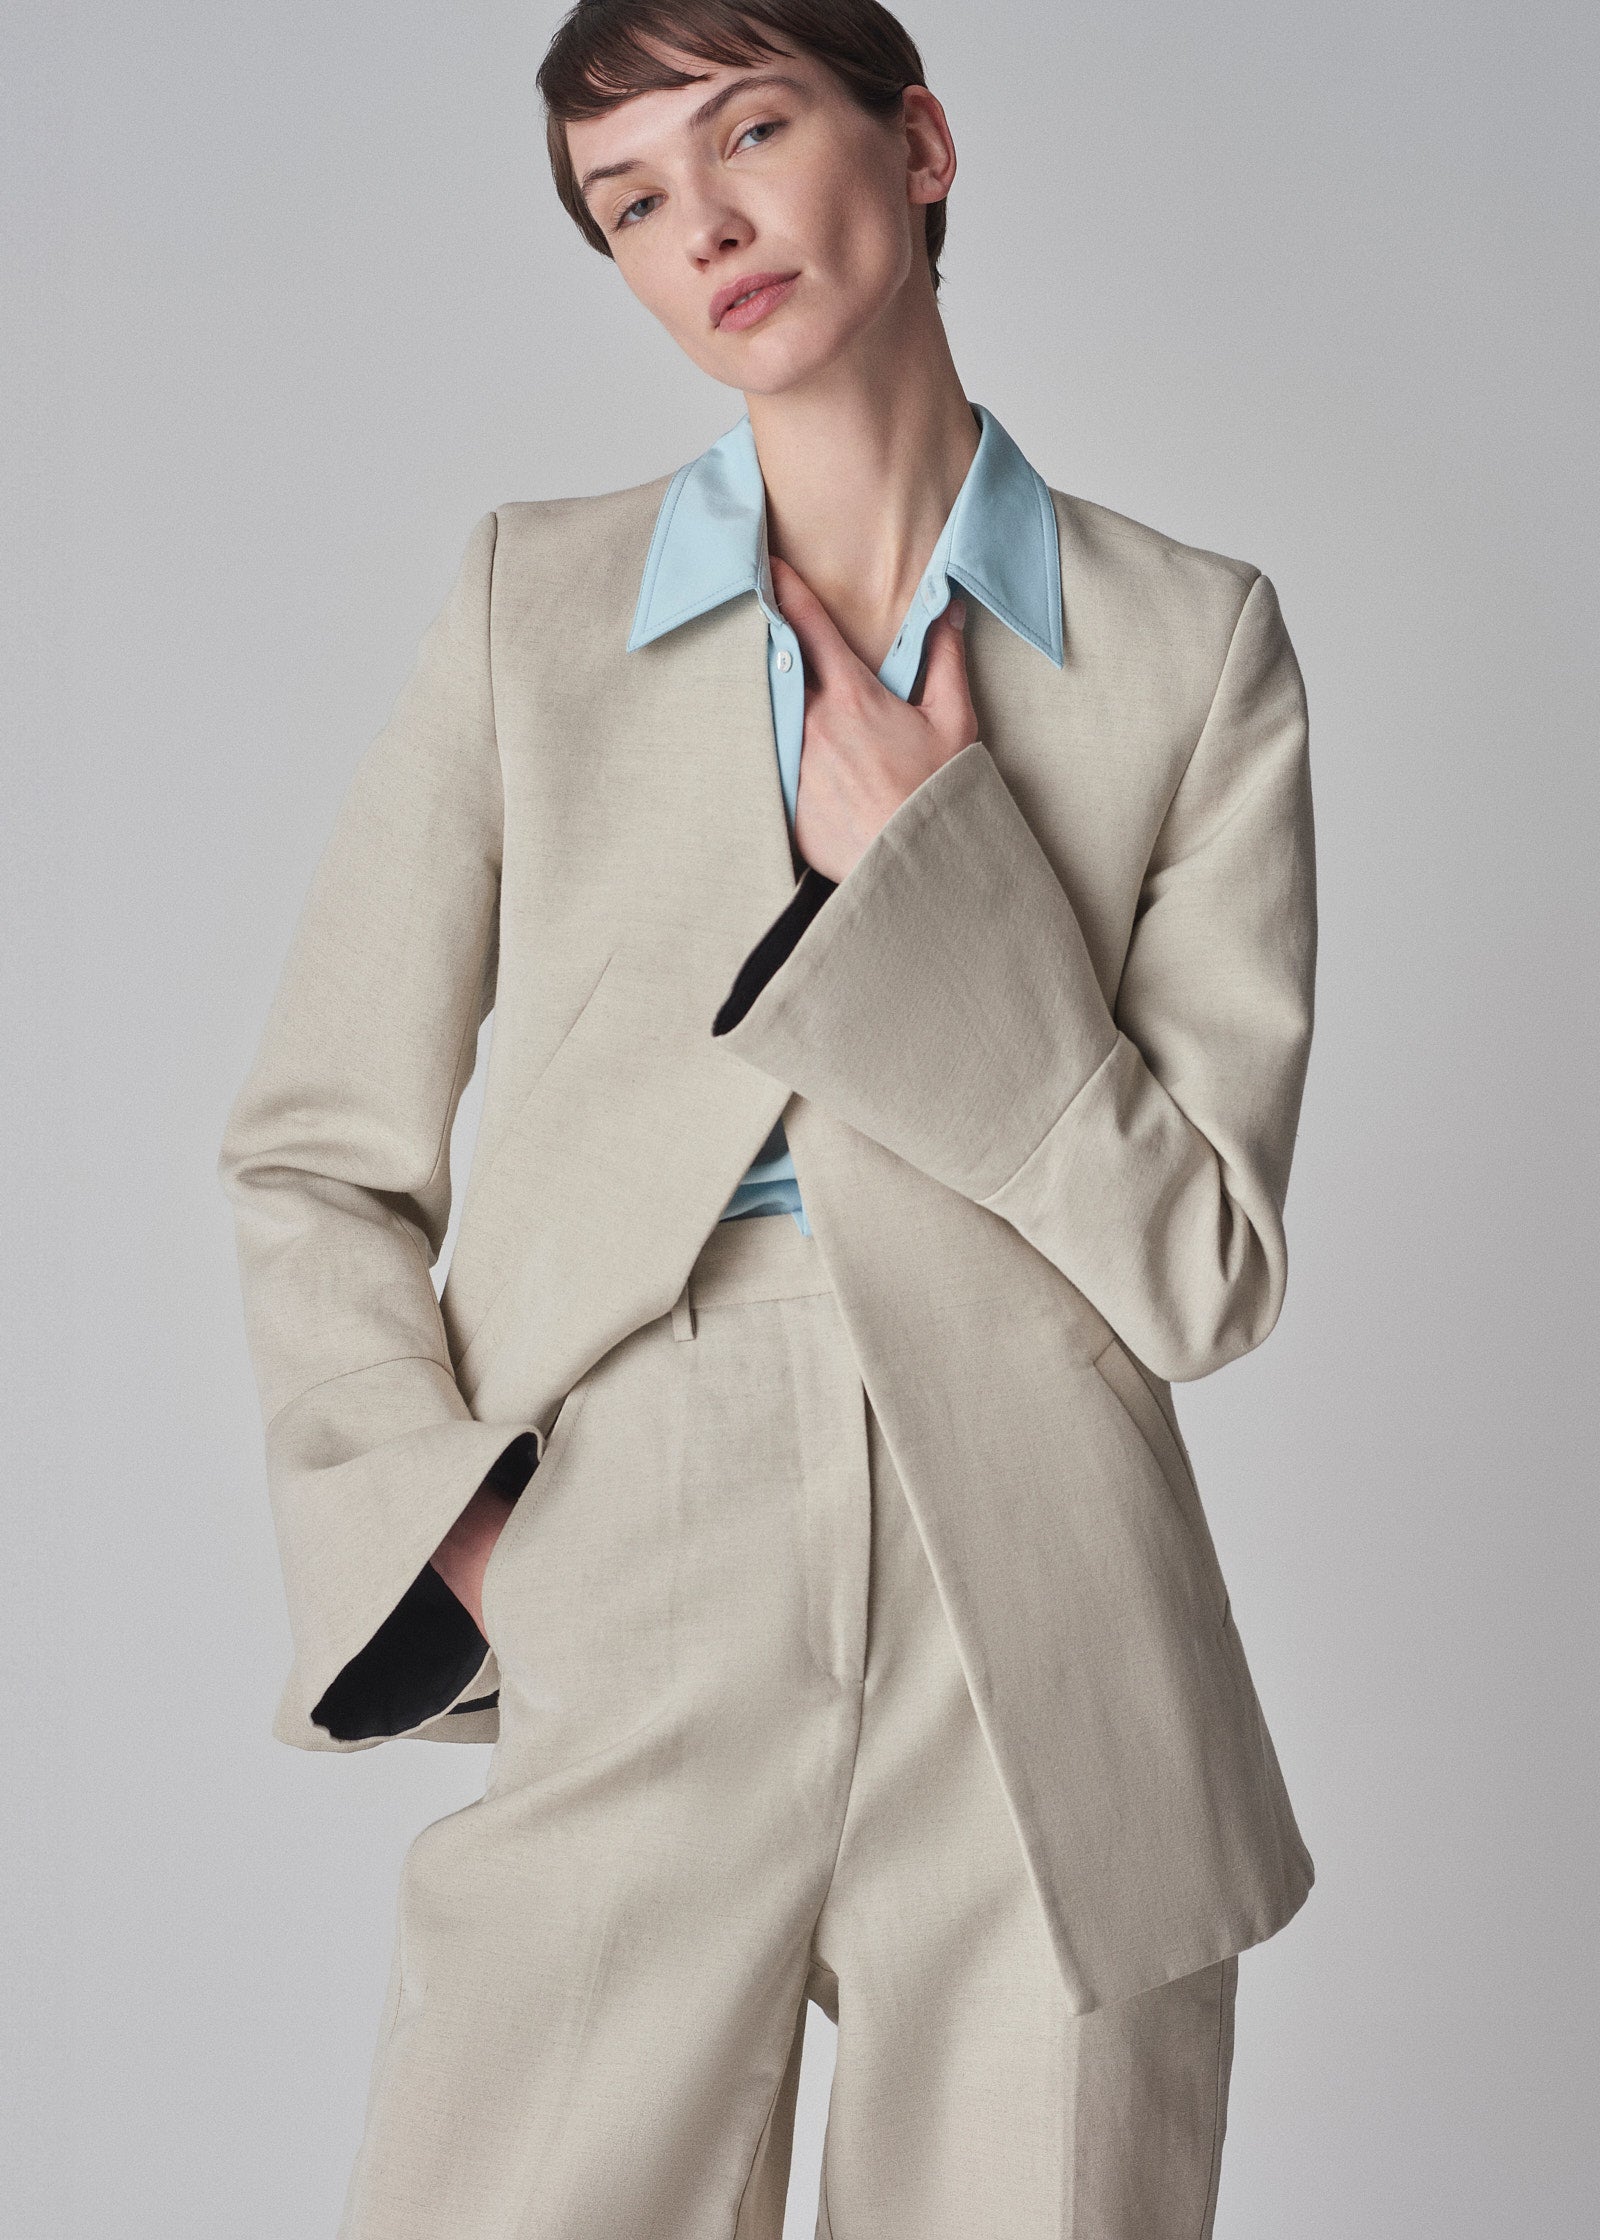 Peplum Cuff Jacket in Linen - Clay - CO Collections